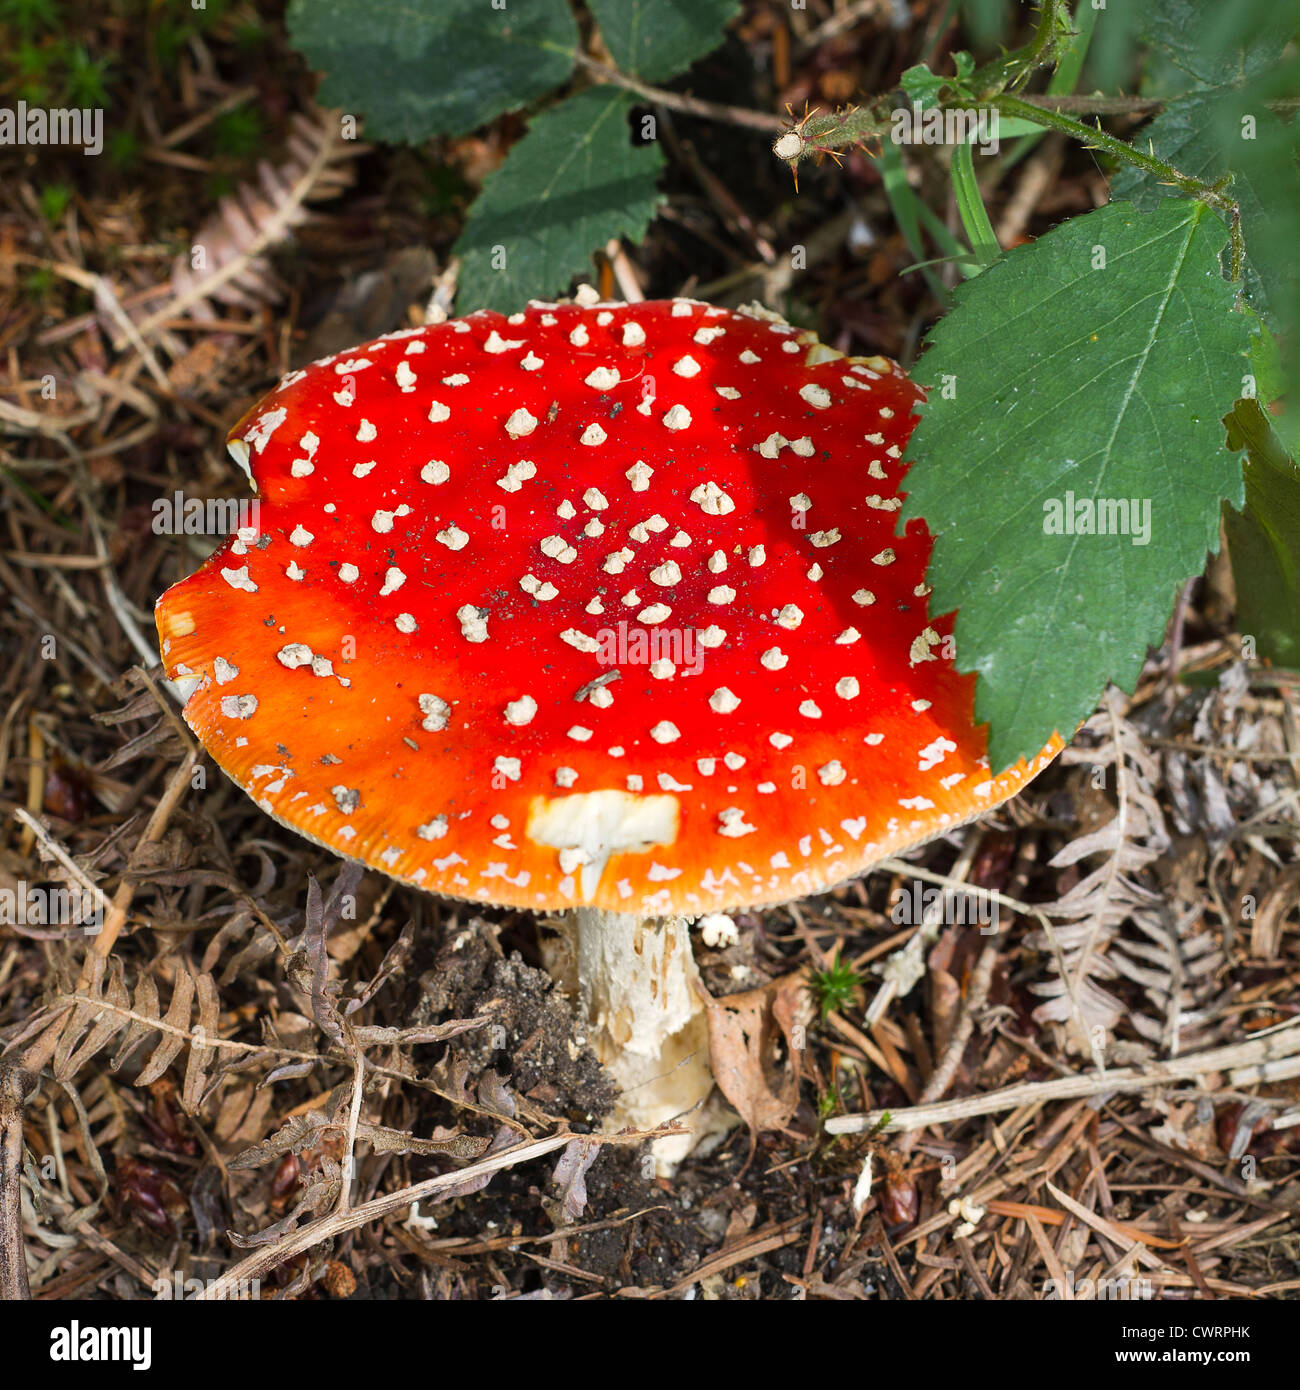 Large red fly agaric toadstool growing on coniferous woodland floor Stock Photo